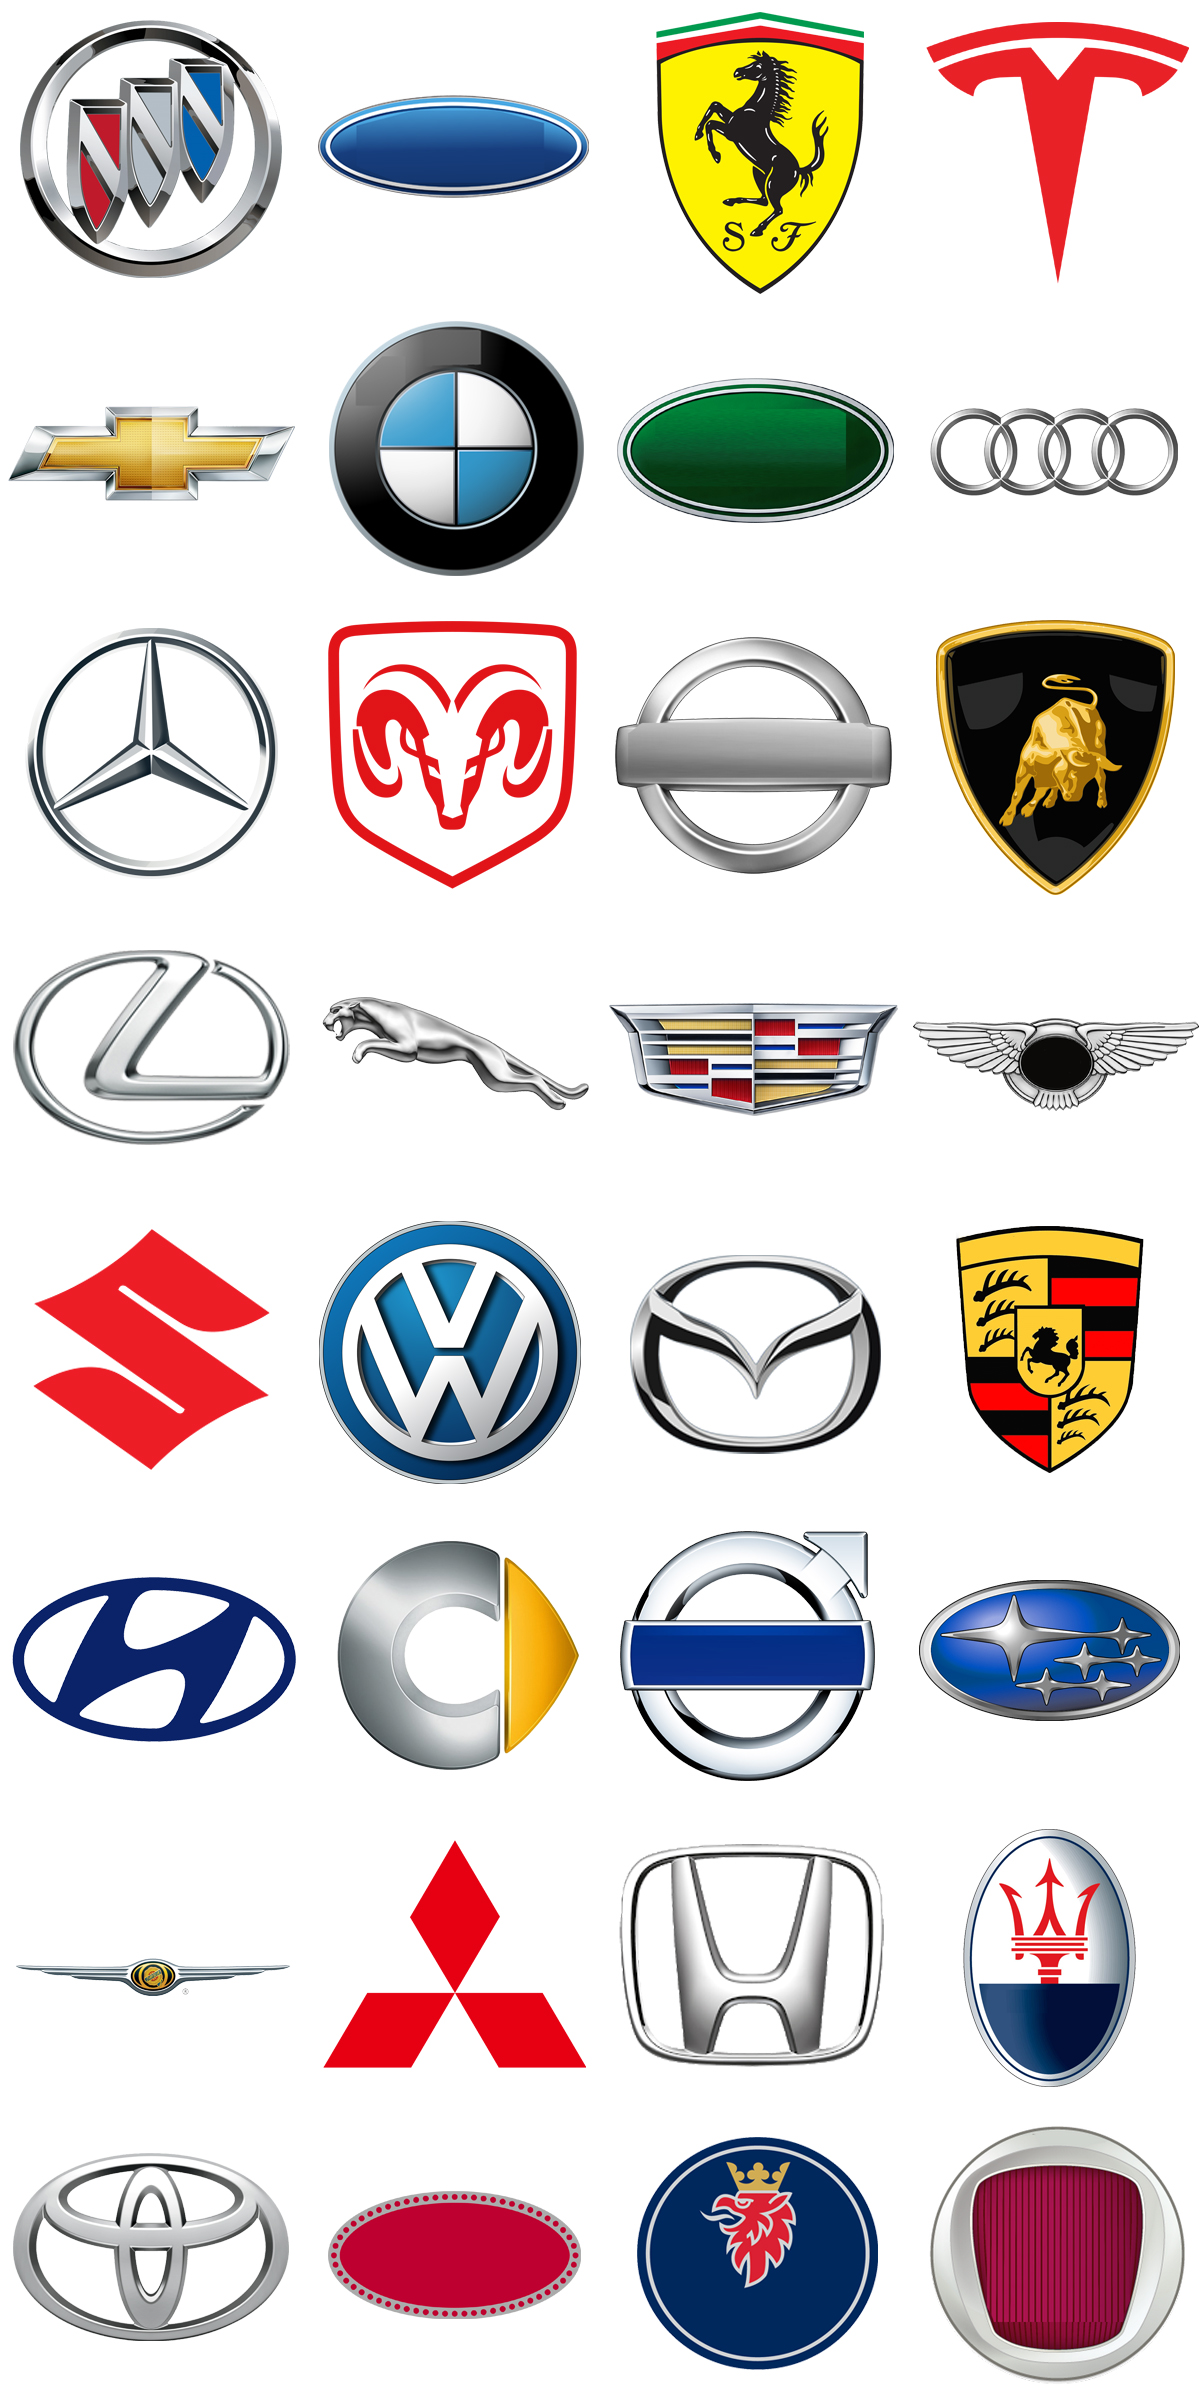 guess the car logo quiz answers